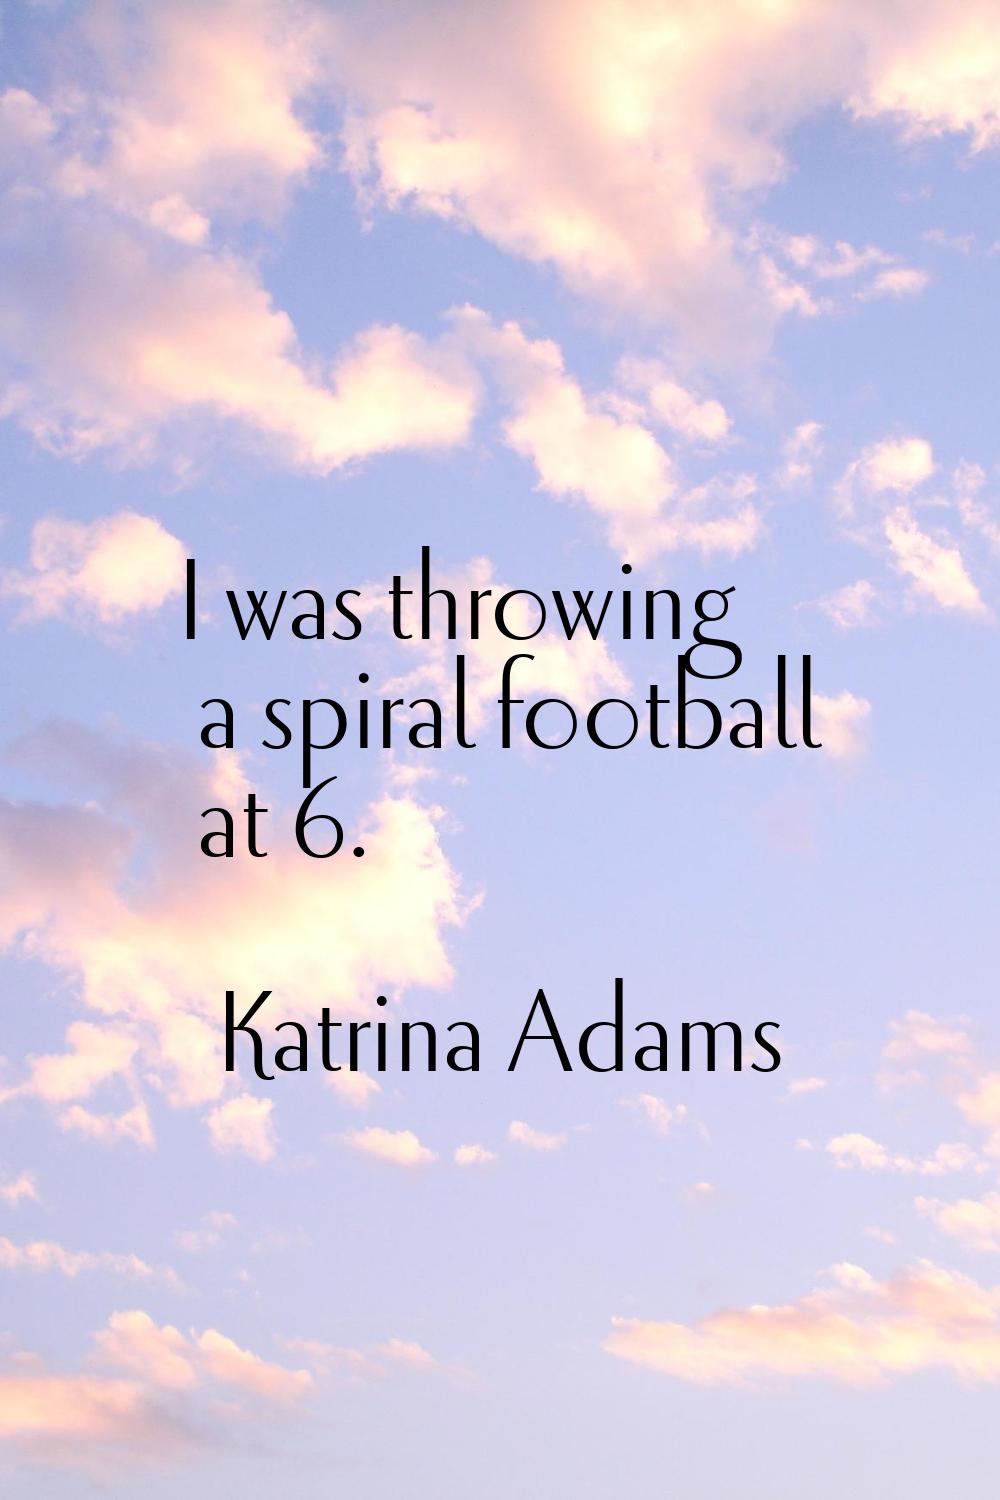 I was throwing a spiral football at 6.